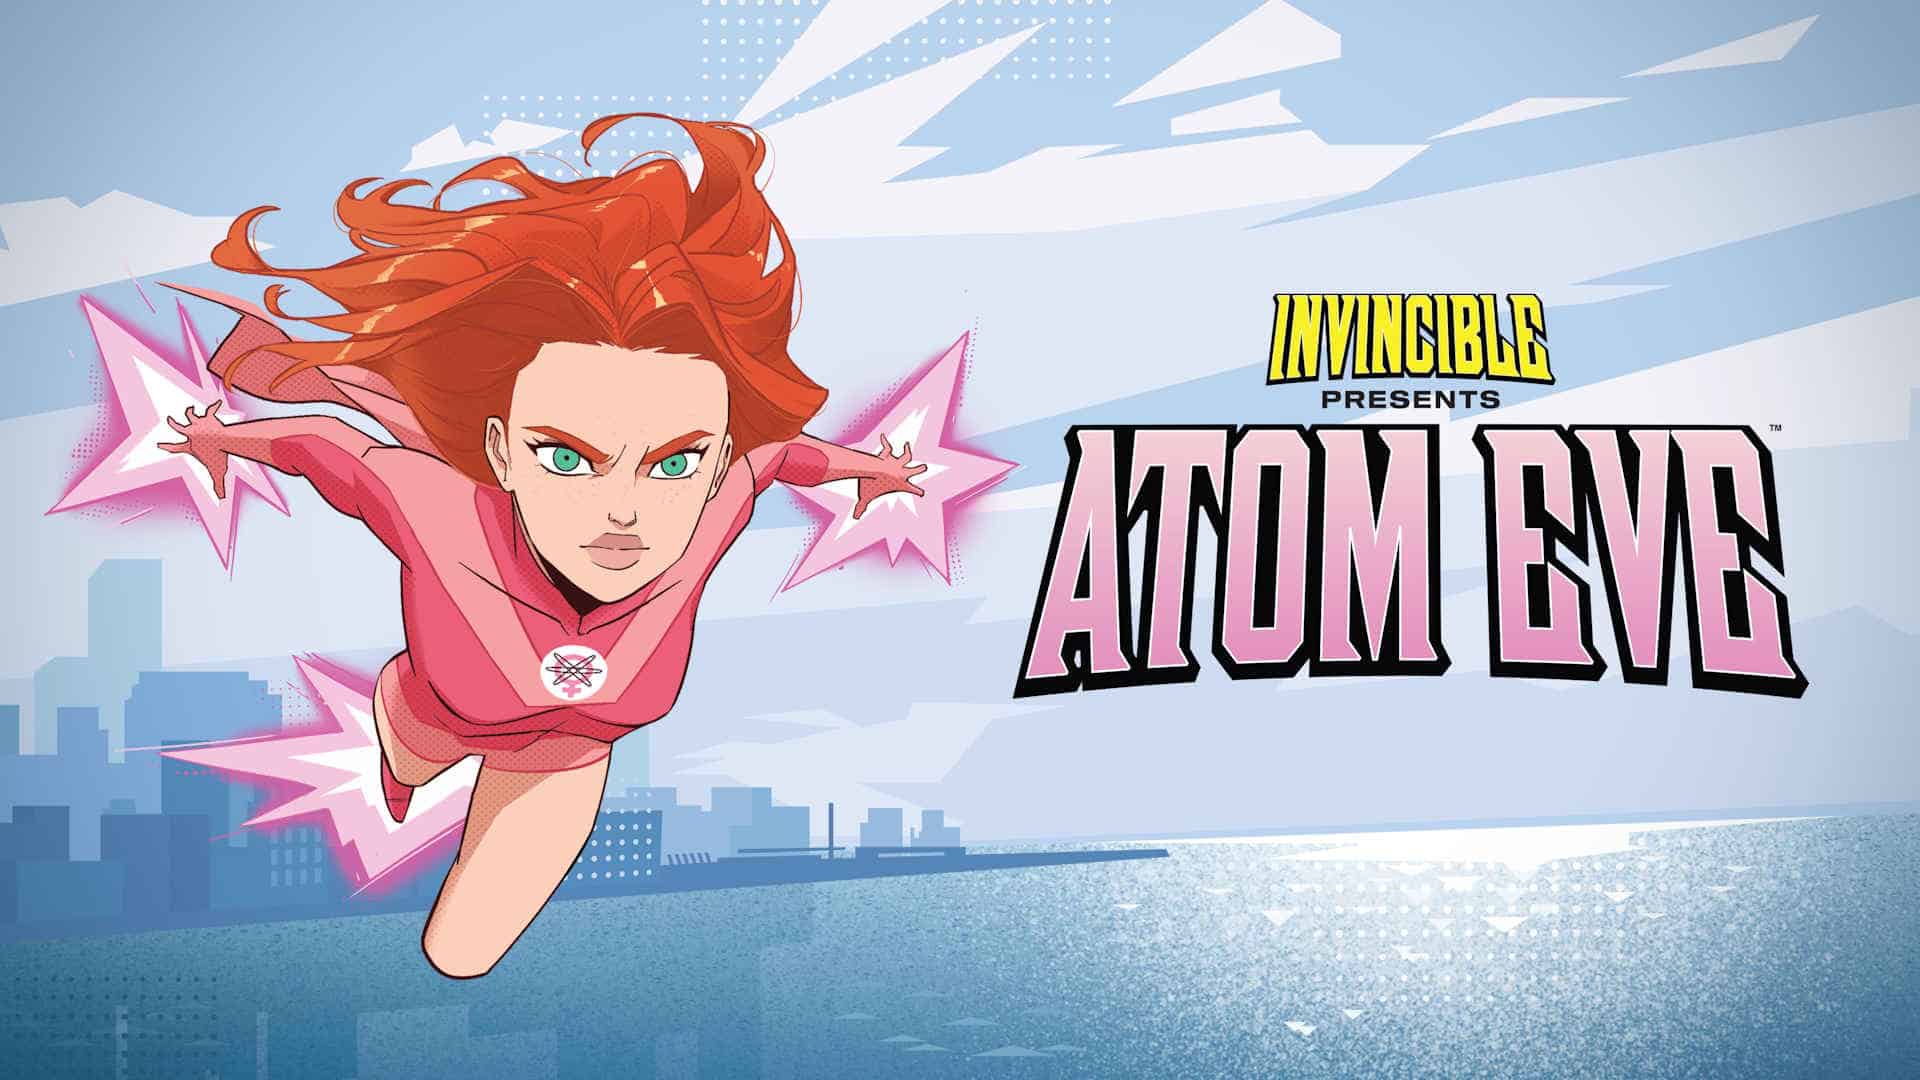 Invincible Presents: Atom Eve: Video Game: The Movie